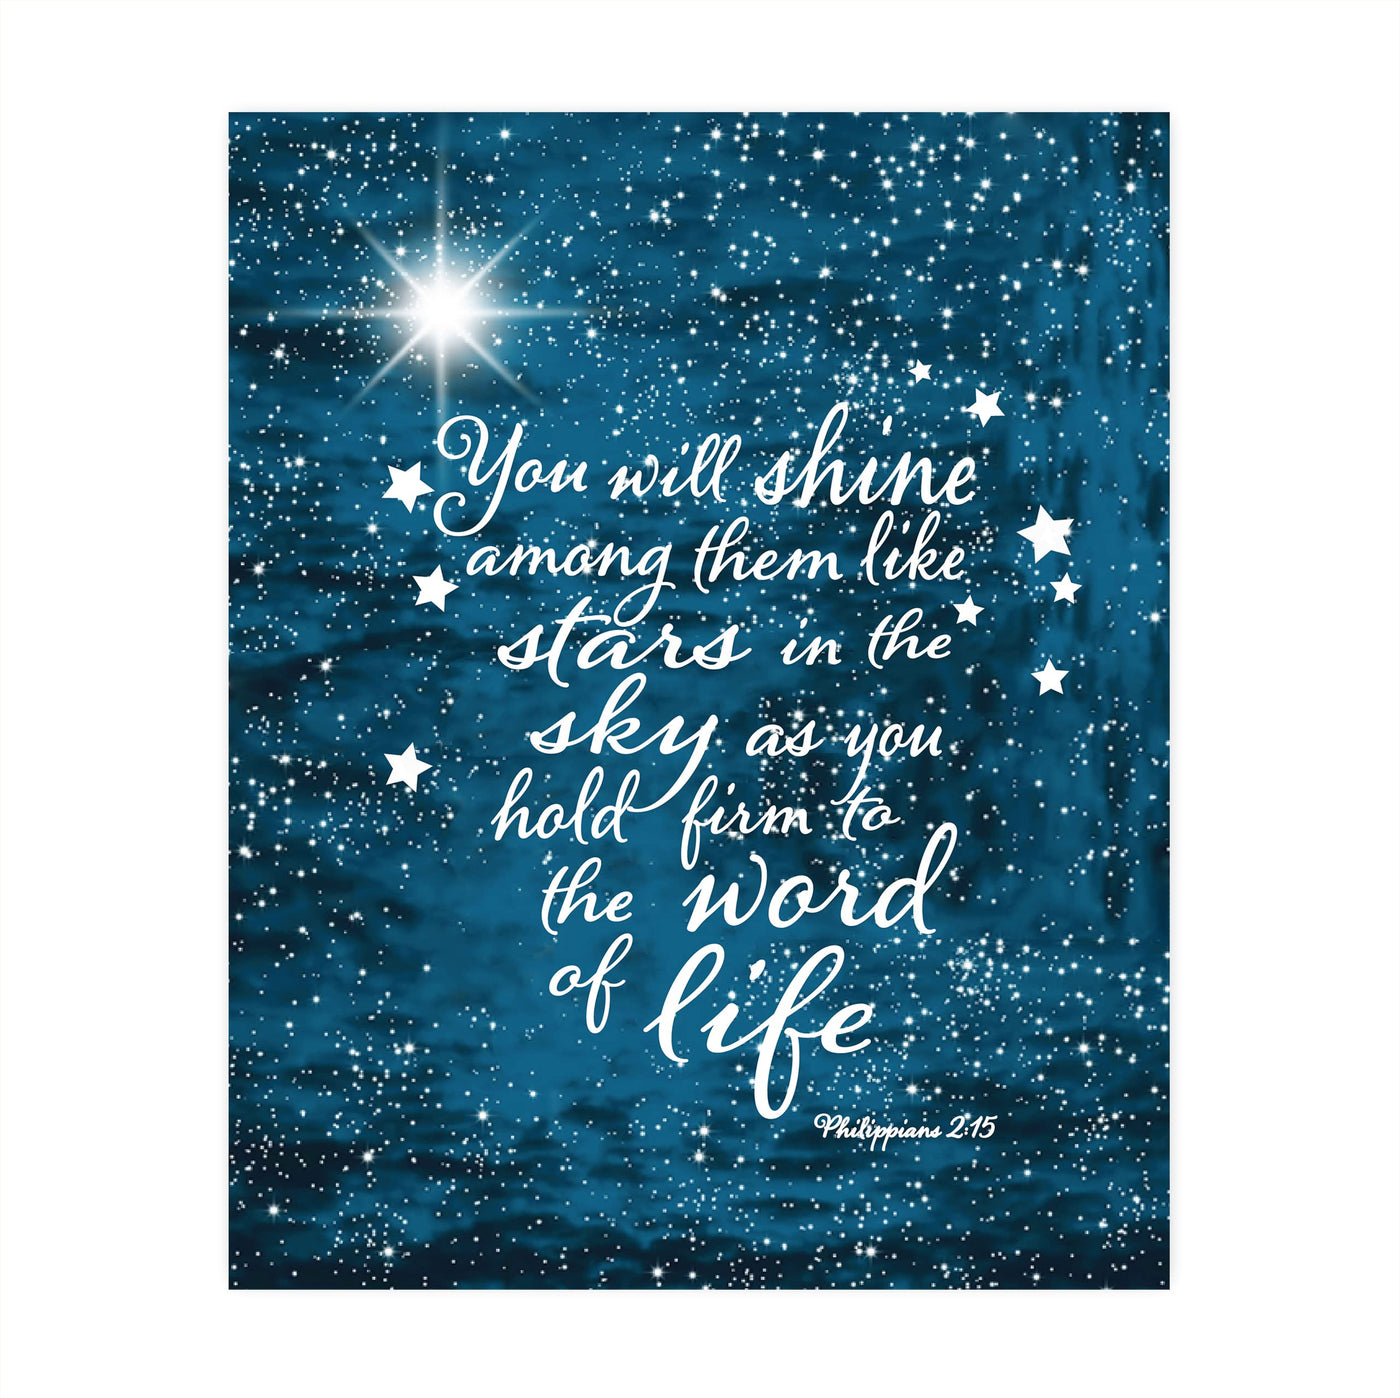 ?You Will Shine Like Stars in the Sky?- Philippians 2:15- Bible Verse Wall Art- 8 x 10" Starry Typographic Design. Scripture Wall Print-Ready to Frame. Home-Office-Church D?cor. Great Christian Gift!